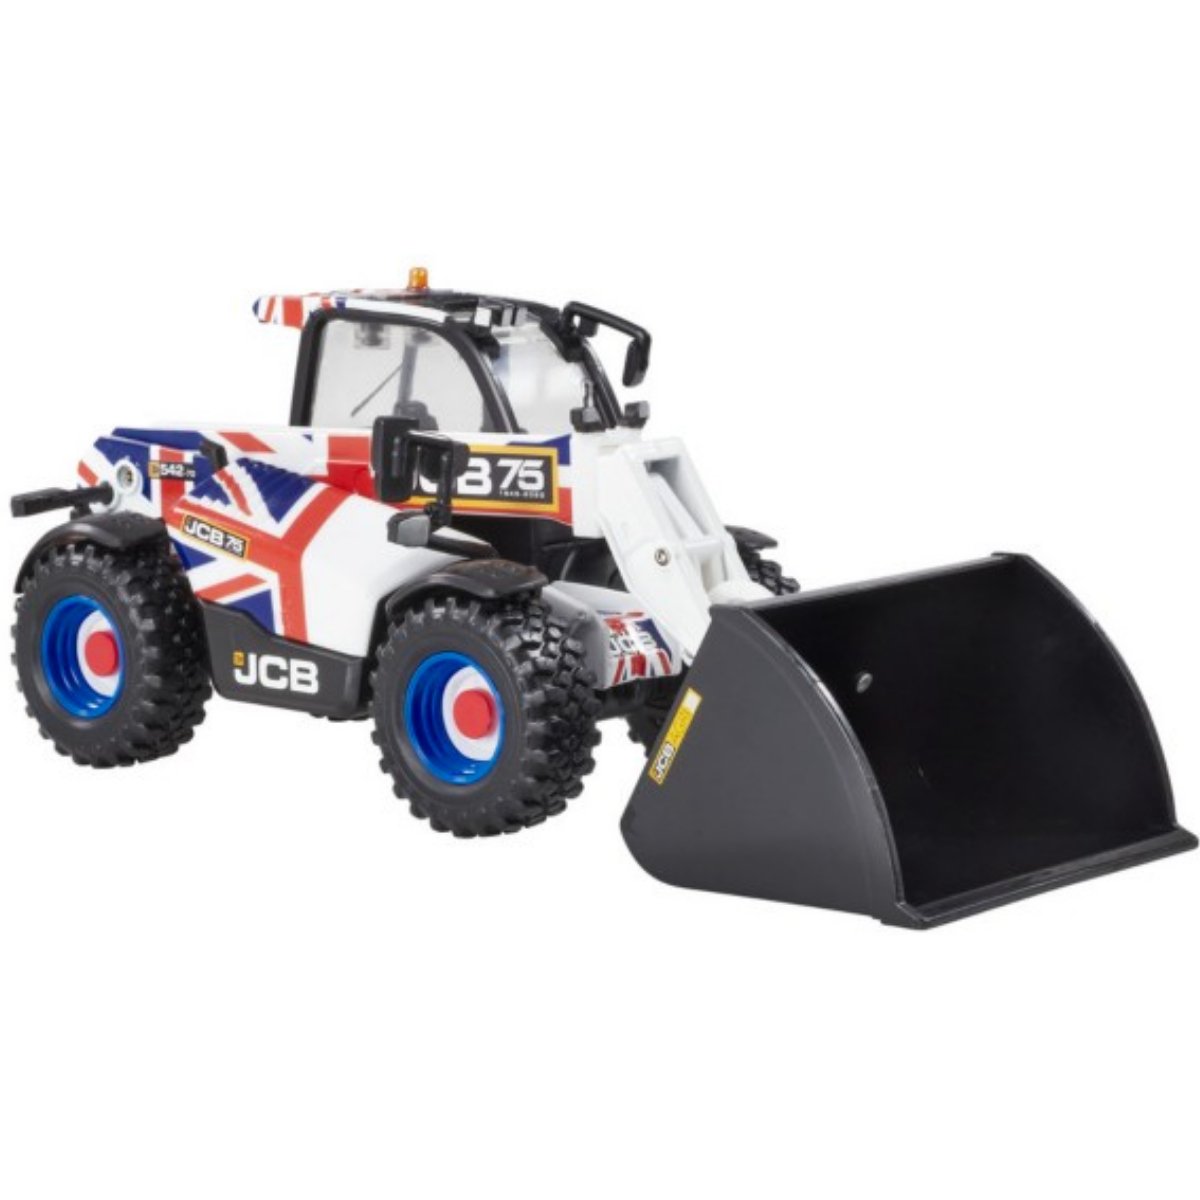 Britains JCB Union Jack AgriPro Loadall Limited Edition - 1:32 Scale - Phillips Hobbies